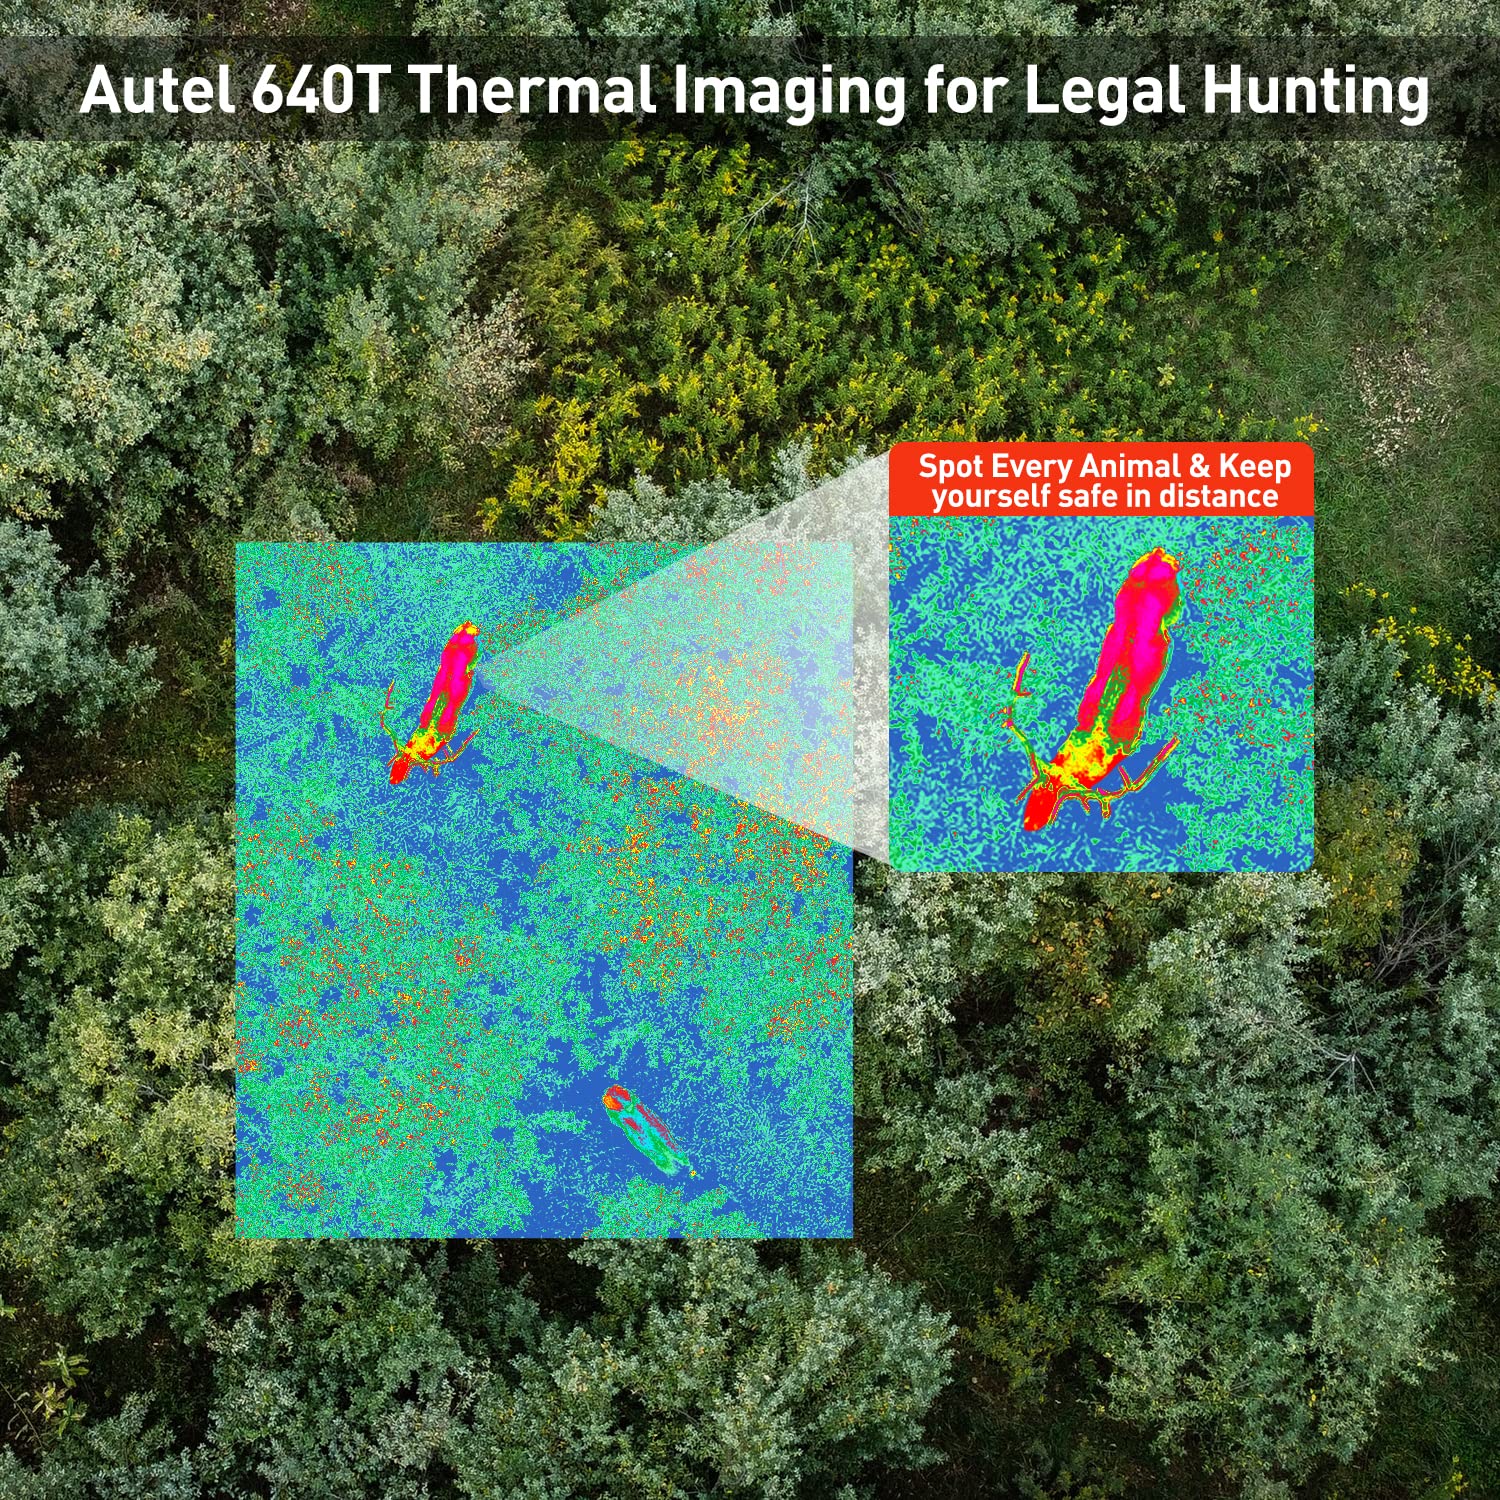 Autel 640T Thermal Imaging for Legal Hunting